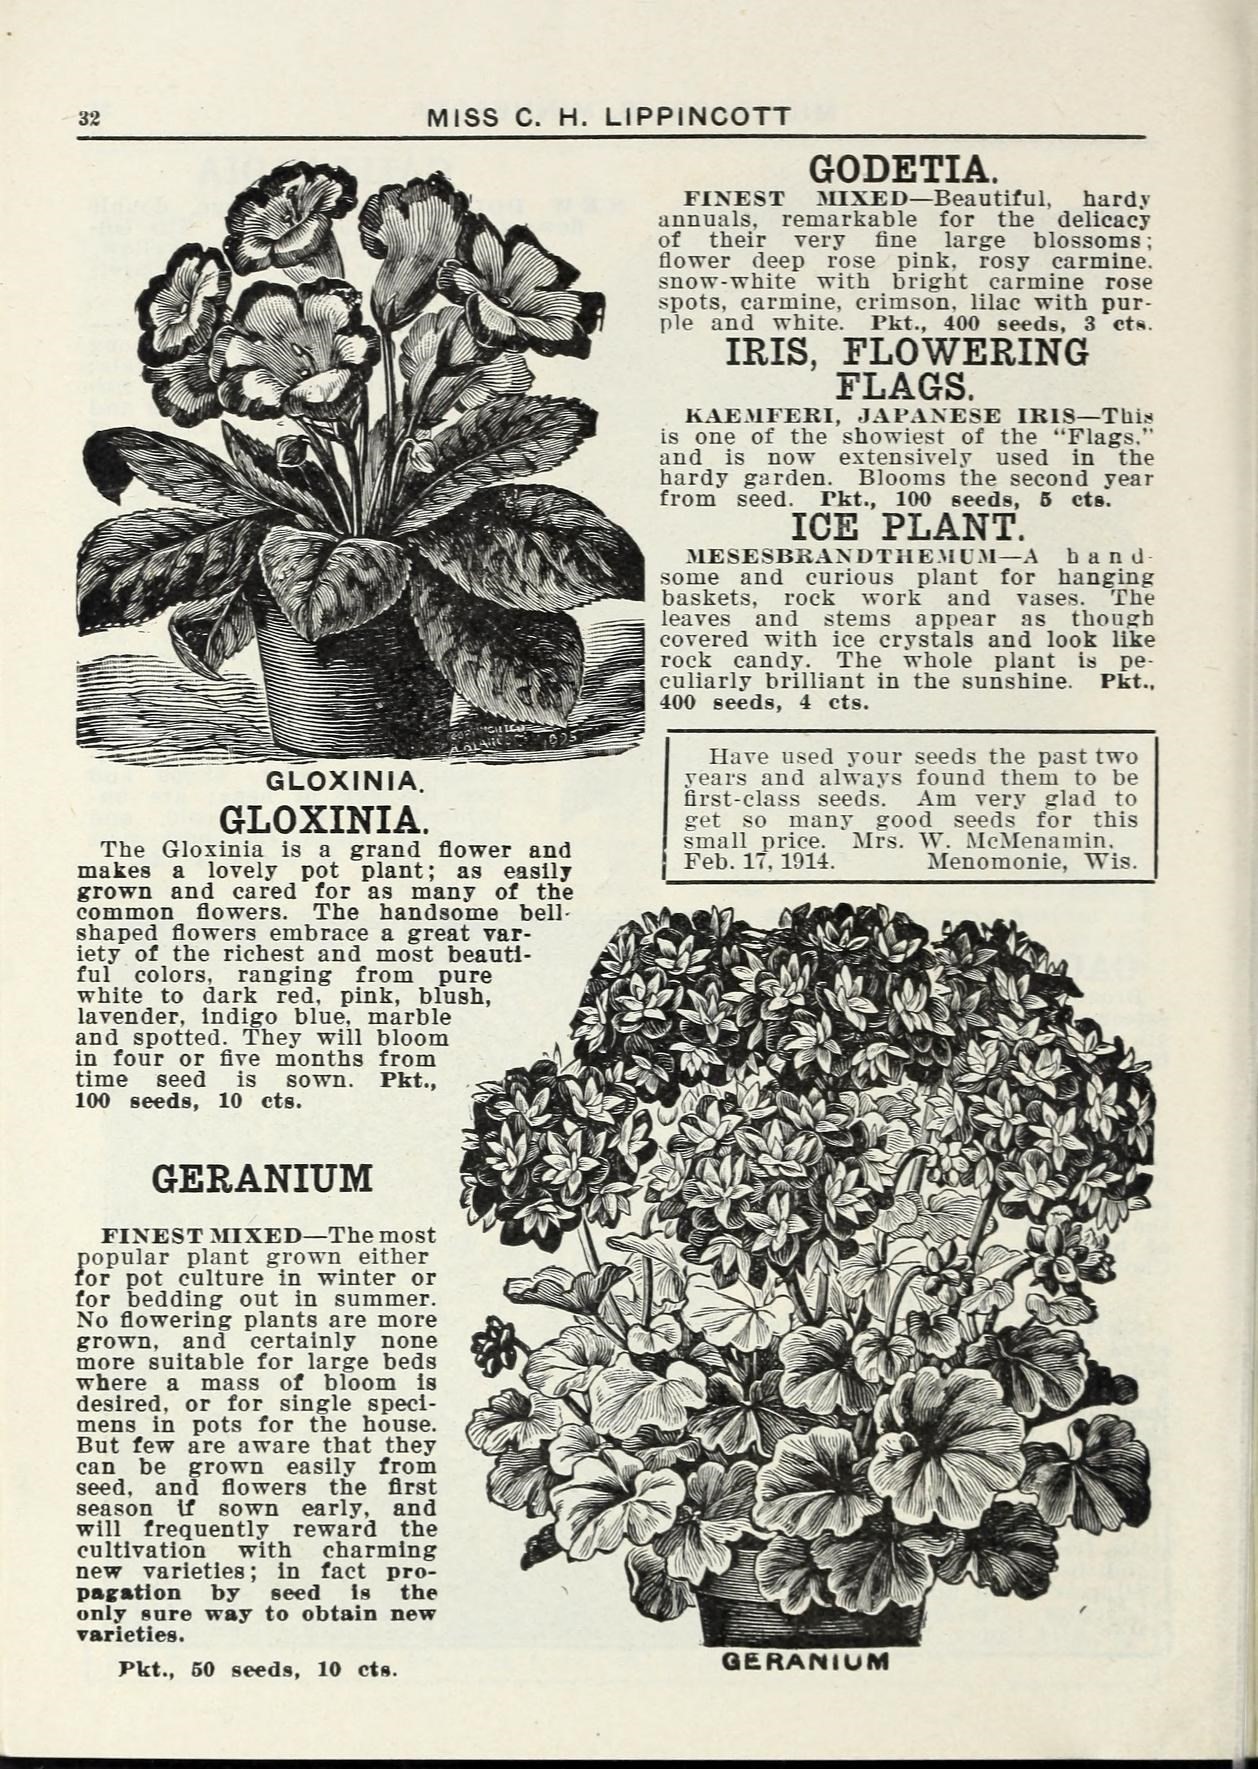 the old recipe booklet shows different varieties of flowers